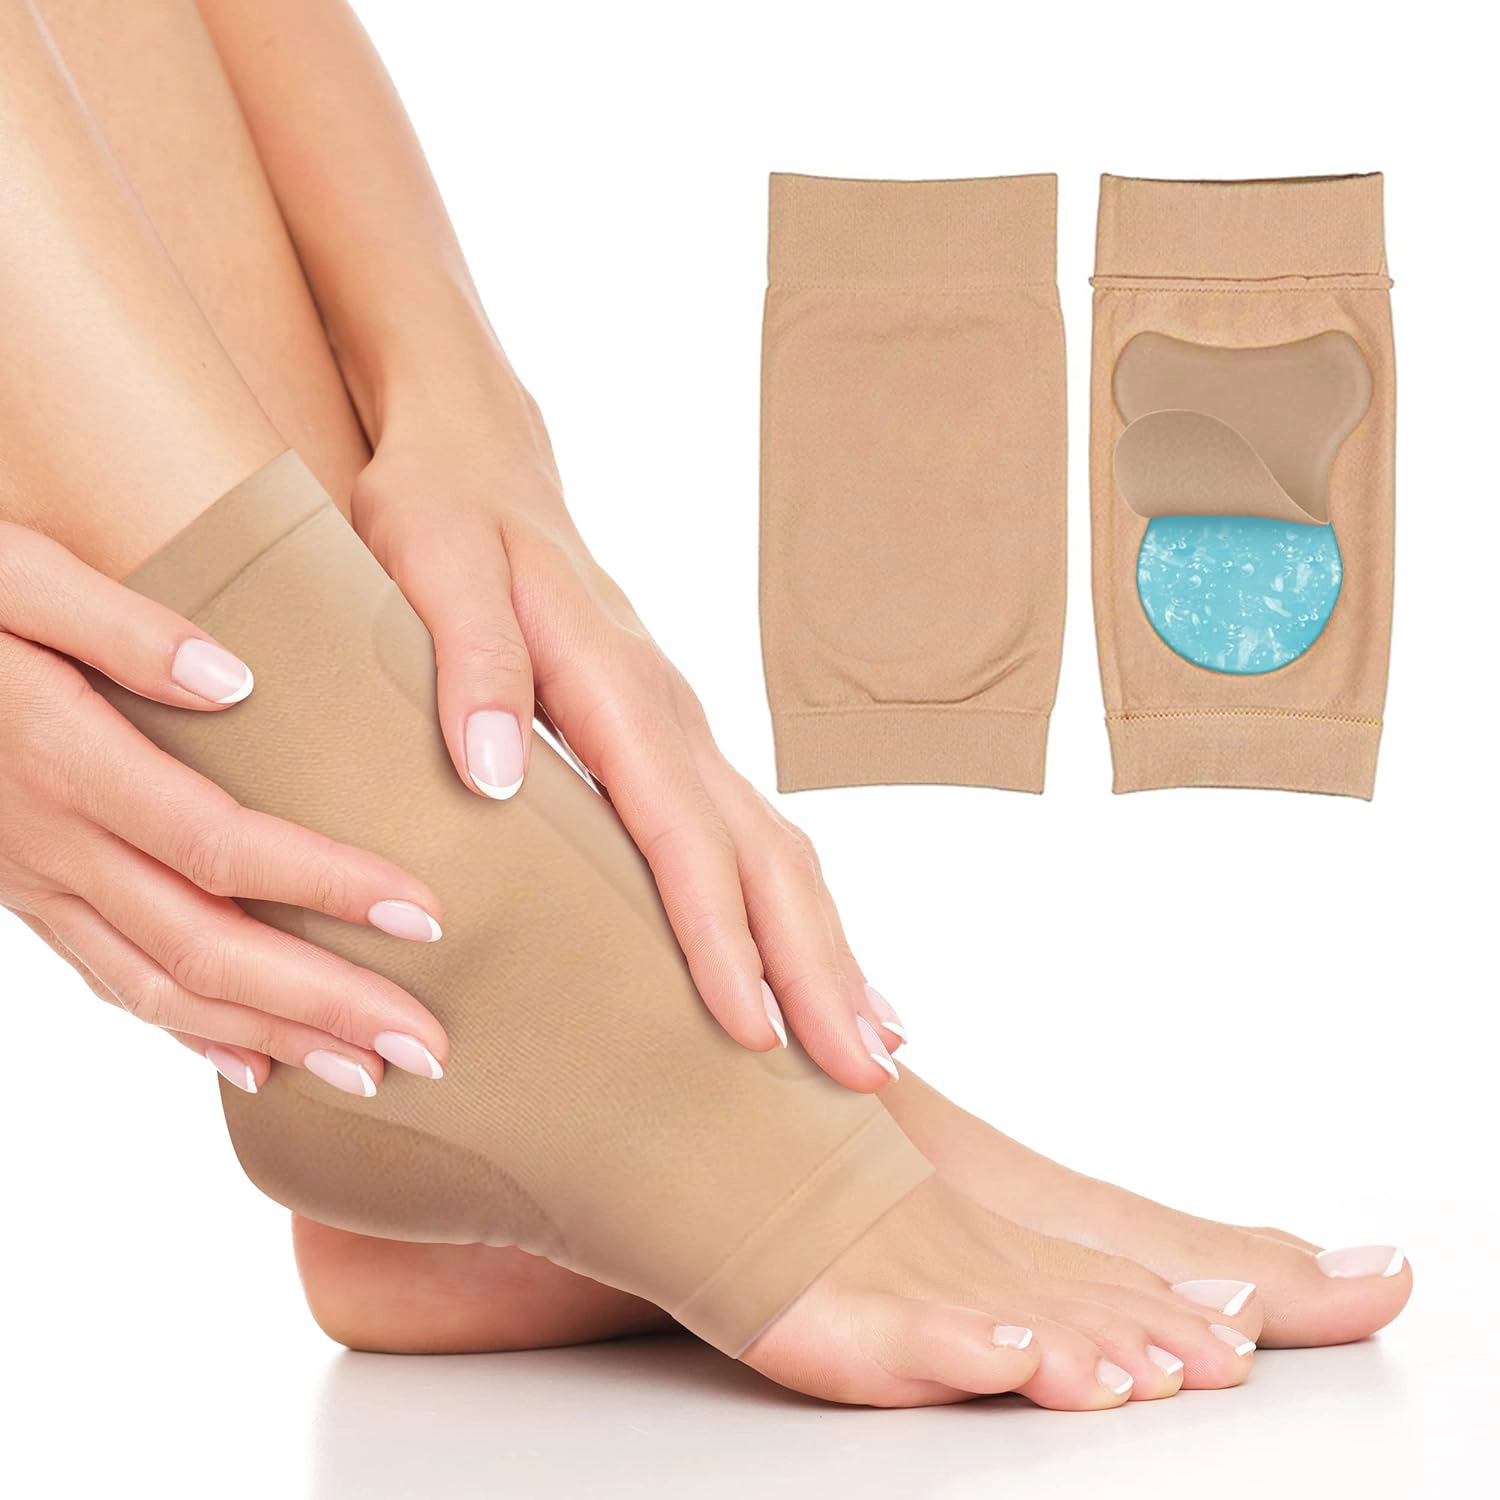 Compression Socks - Prevent and Treat Varicose Veins, Ease Feet and Ankle  Swelling, Stimulate Blood Flow Circulation. Great for Travel, Sports,  Athletes, Nurses and Maternity. No More Tired Achy Legs. : 